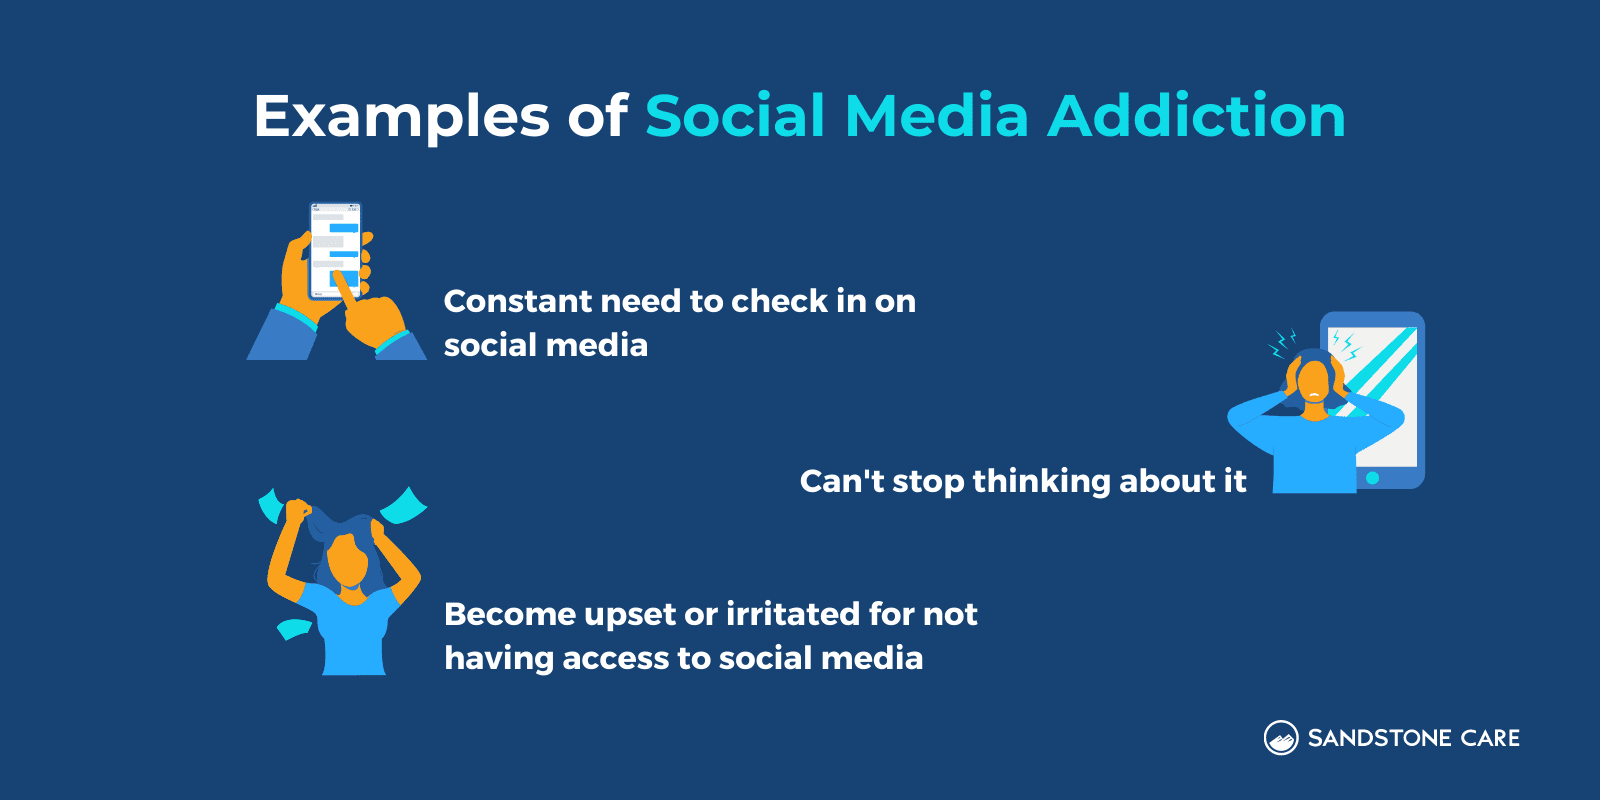 Examples Of Social Media Addiction written out next to relevant digital graphics